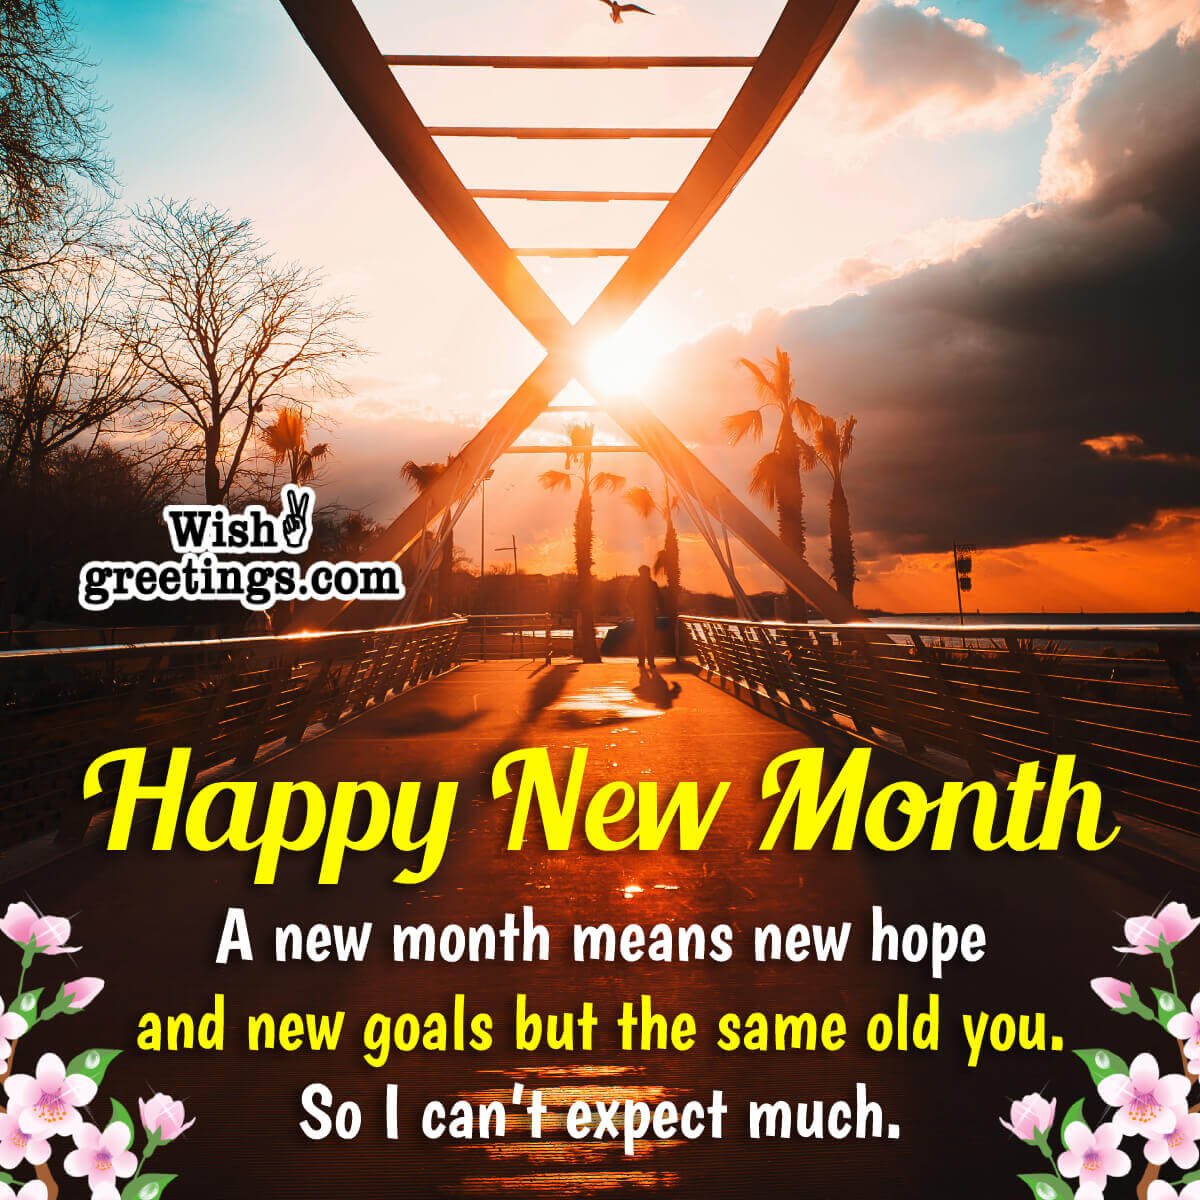 Happy New Month, New Goal Message Image